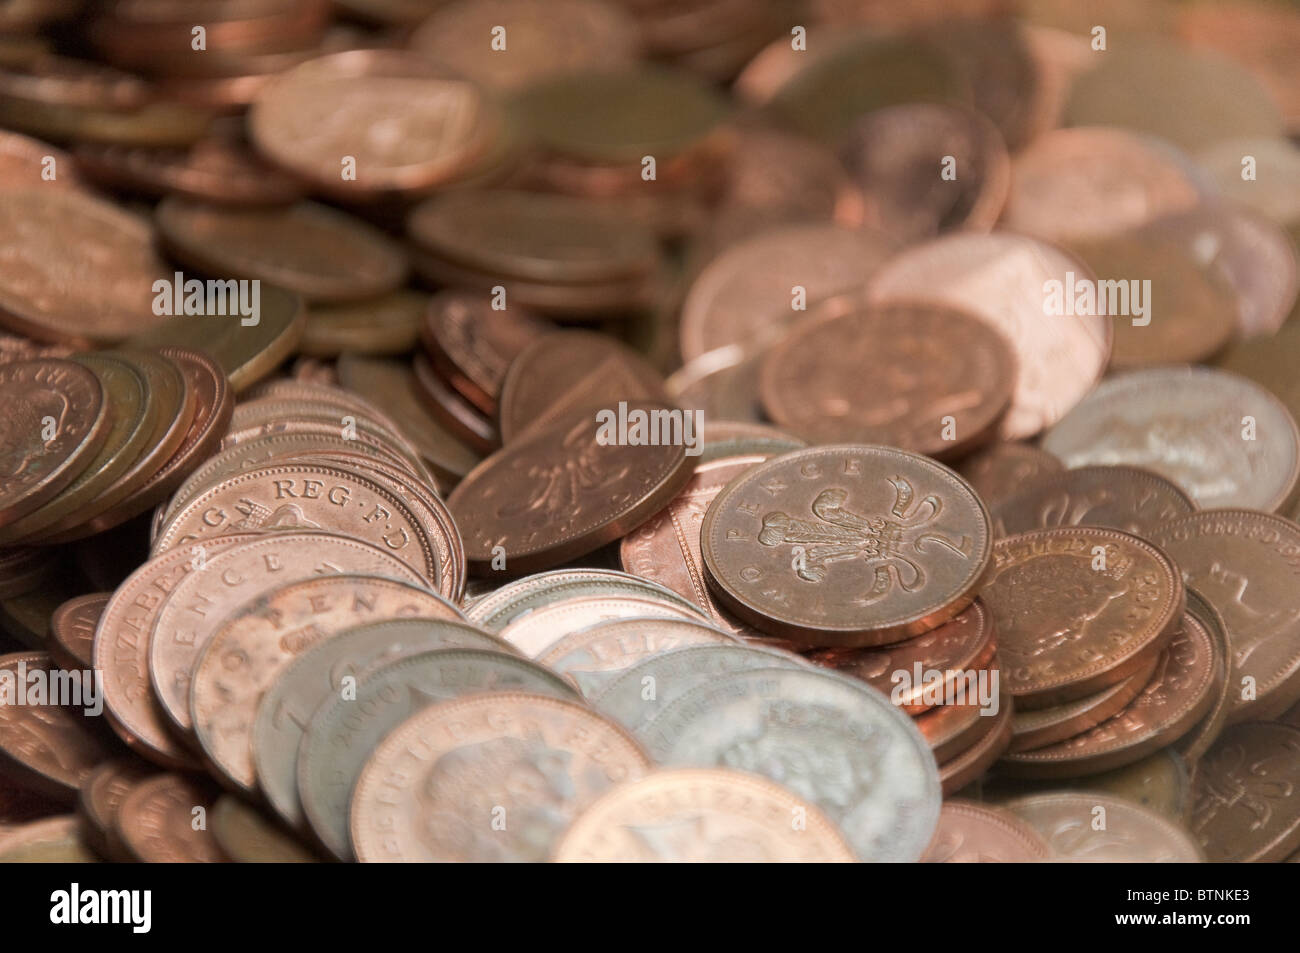 Pile of British Two Pence coins in a gaming machine Stock Photo